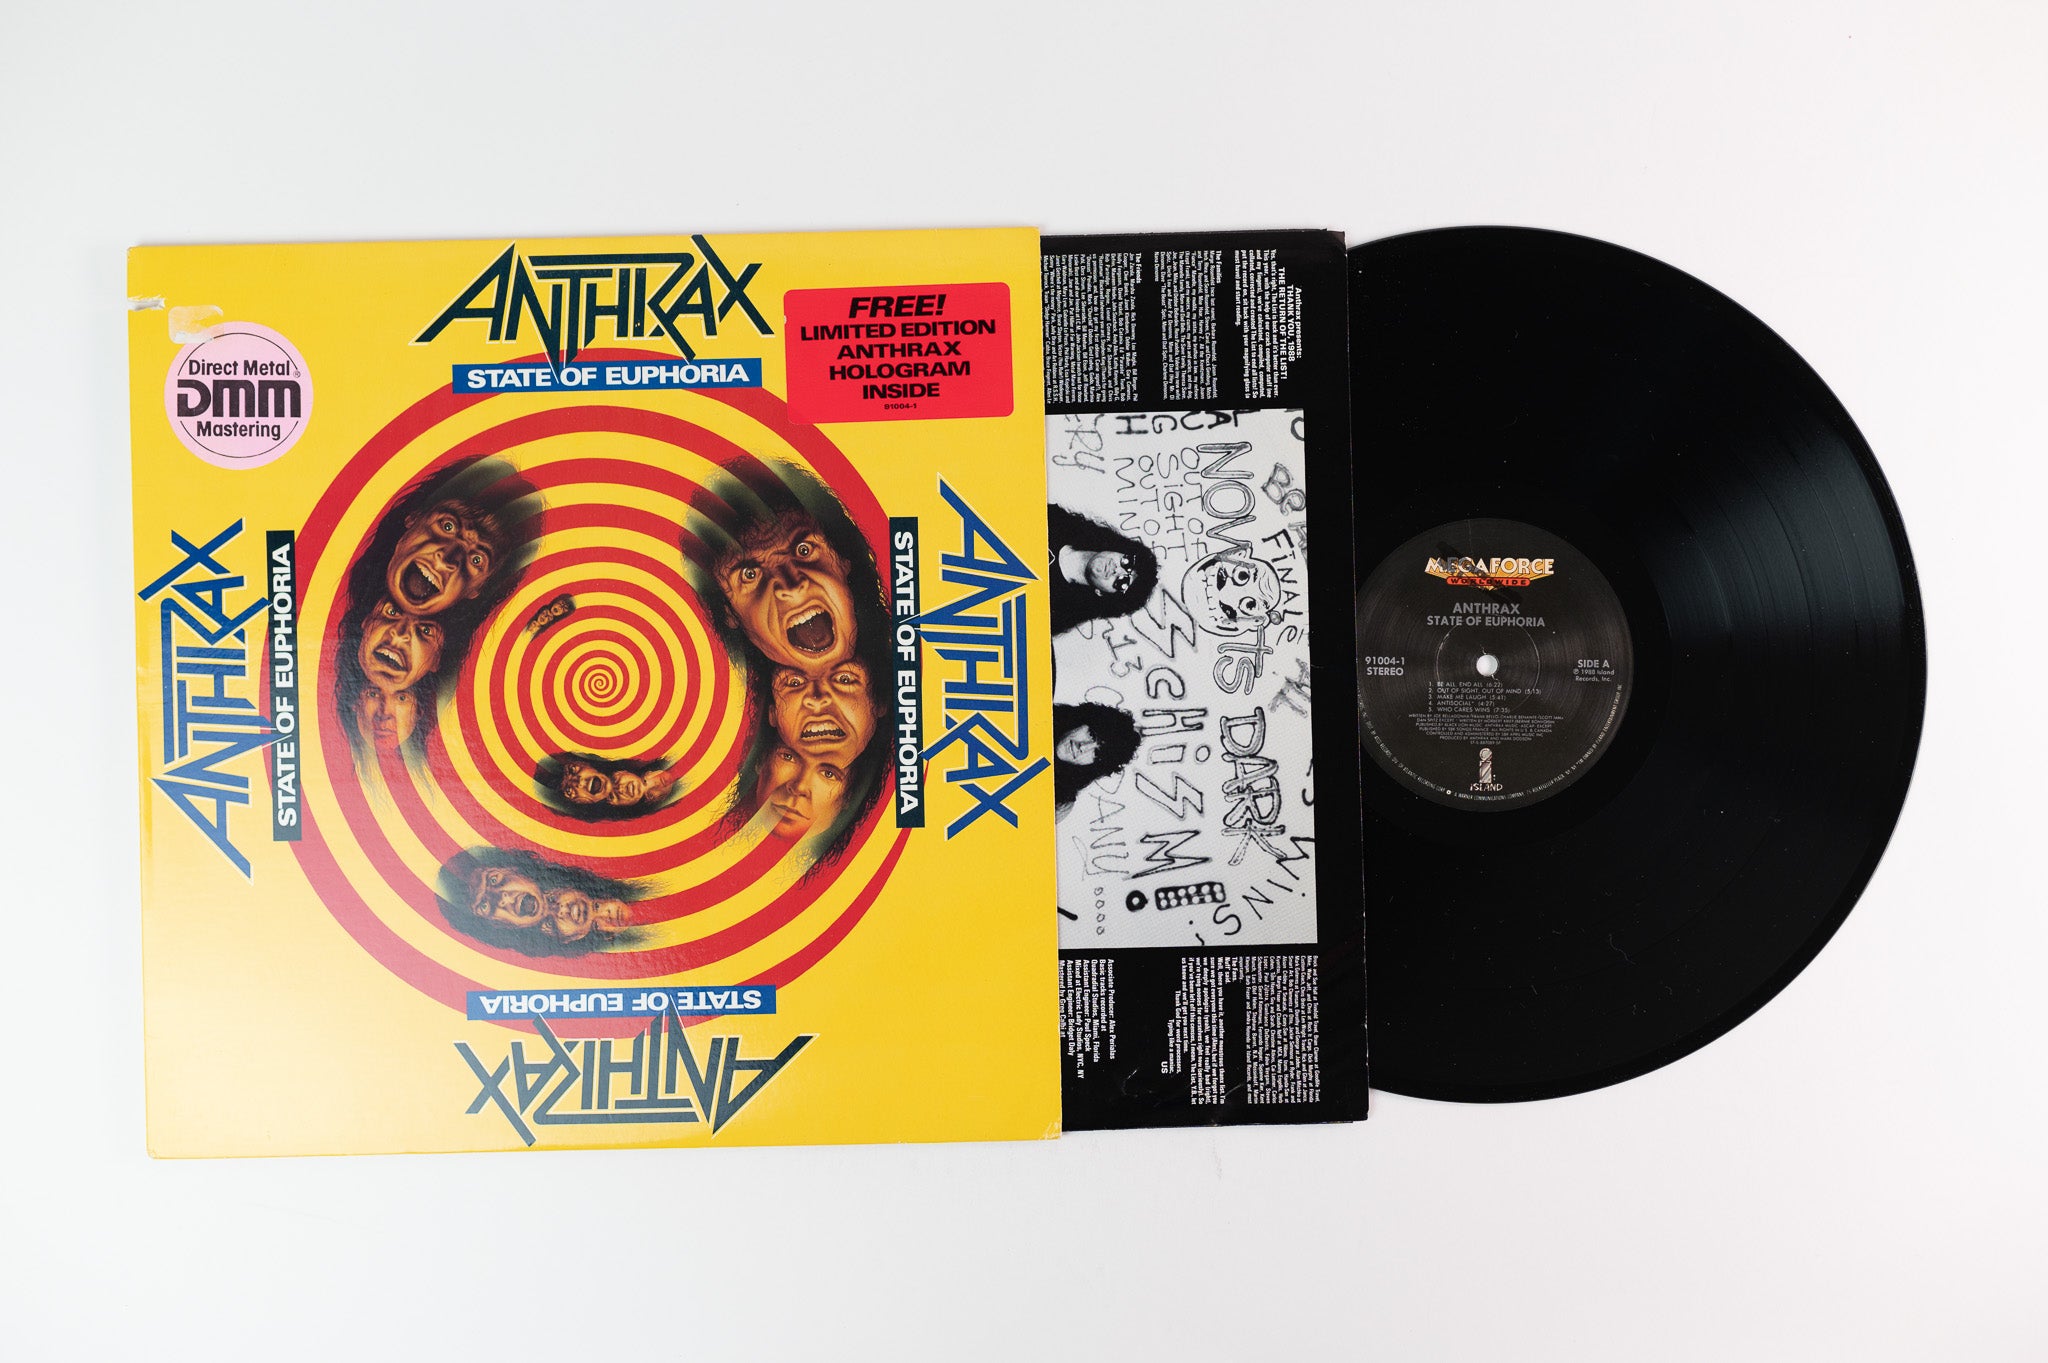 Anthrax - State Of Euphoria on Megaforce Worldwide Limited Edition DMM